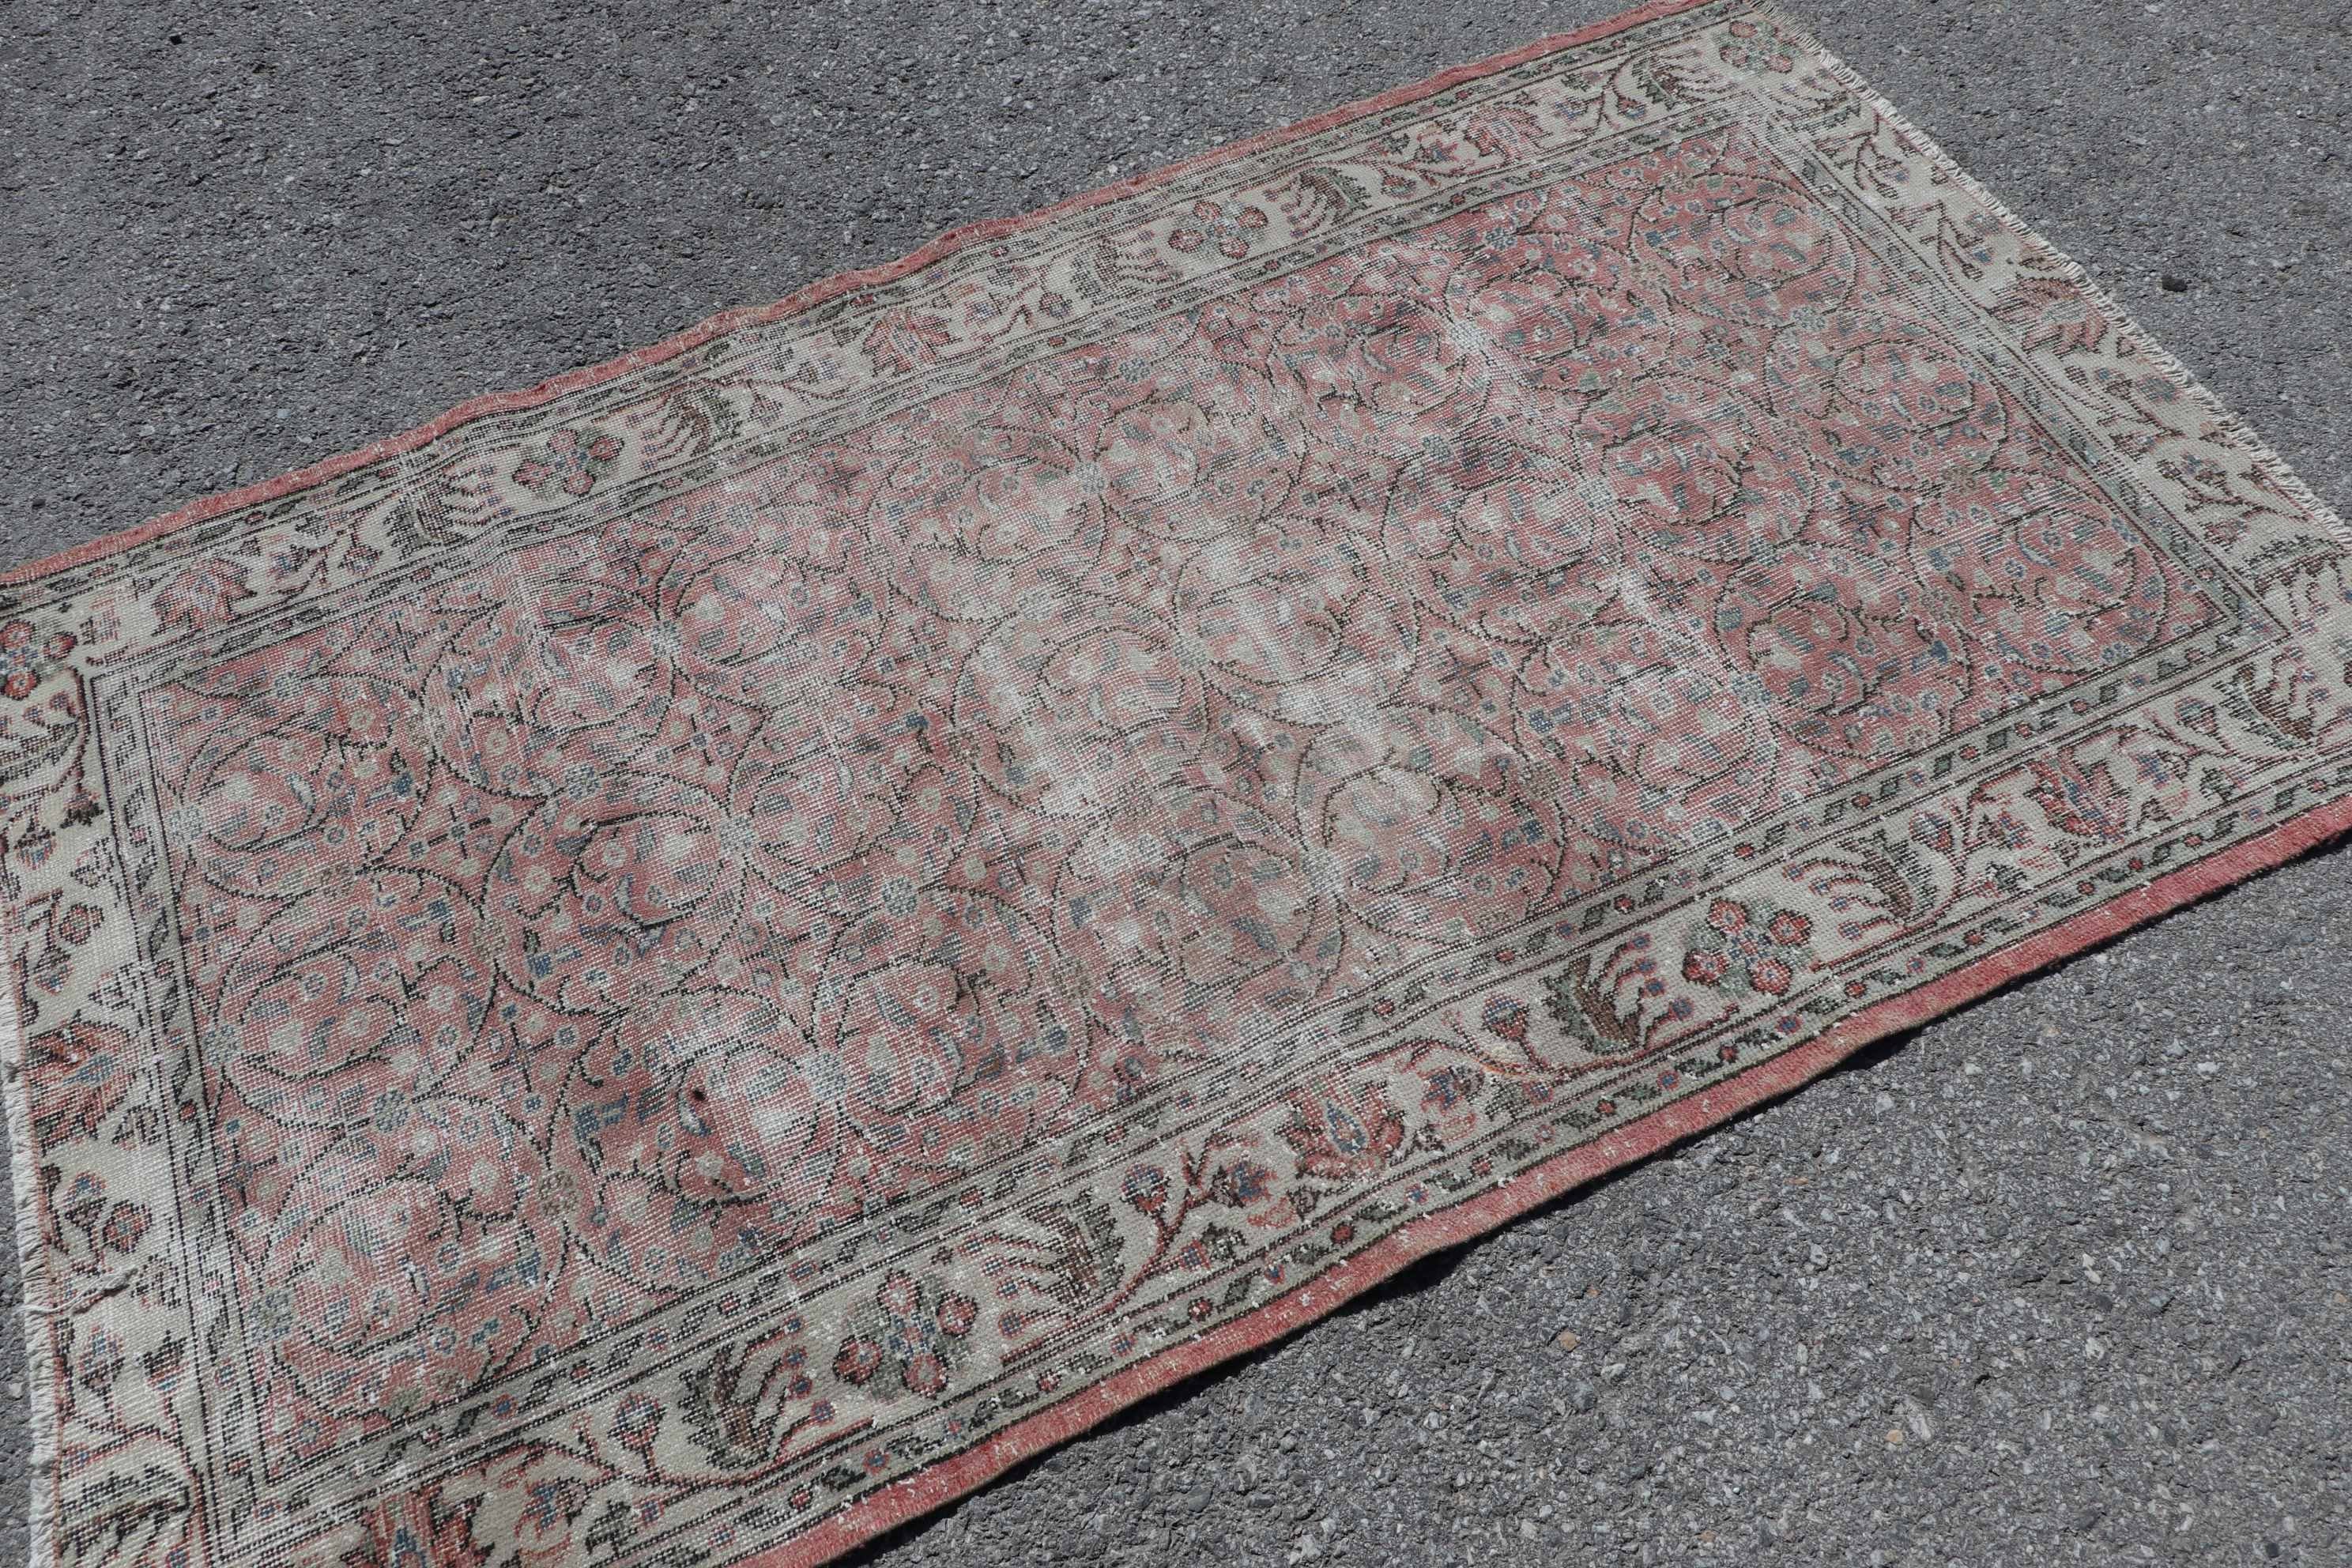 Entry Rug, Vintage Rug, Turkish Rug, Red Anatolian Rugs, 3.8x6.3 ft Accent Rug, Rugs for Entry, Anatolian Rugs, Kitchen Rugs